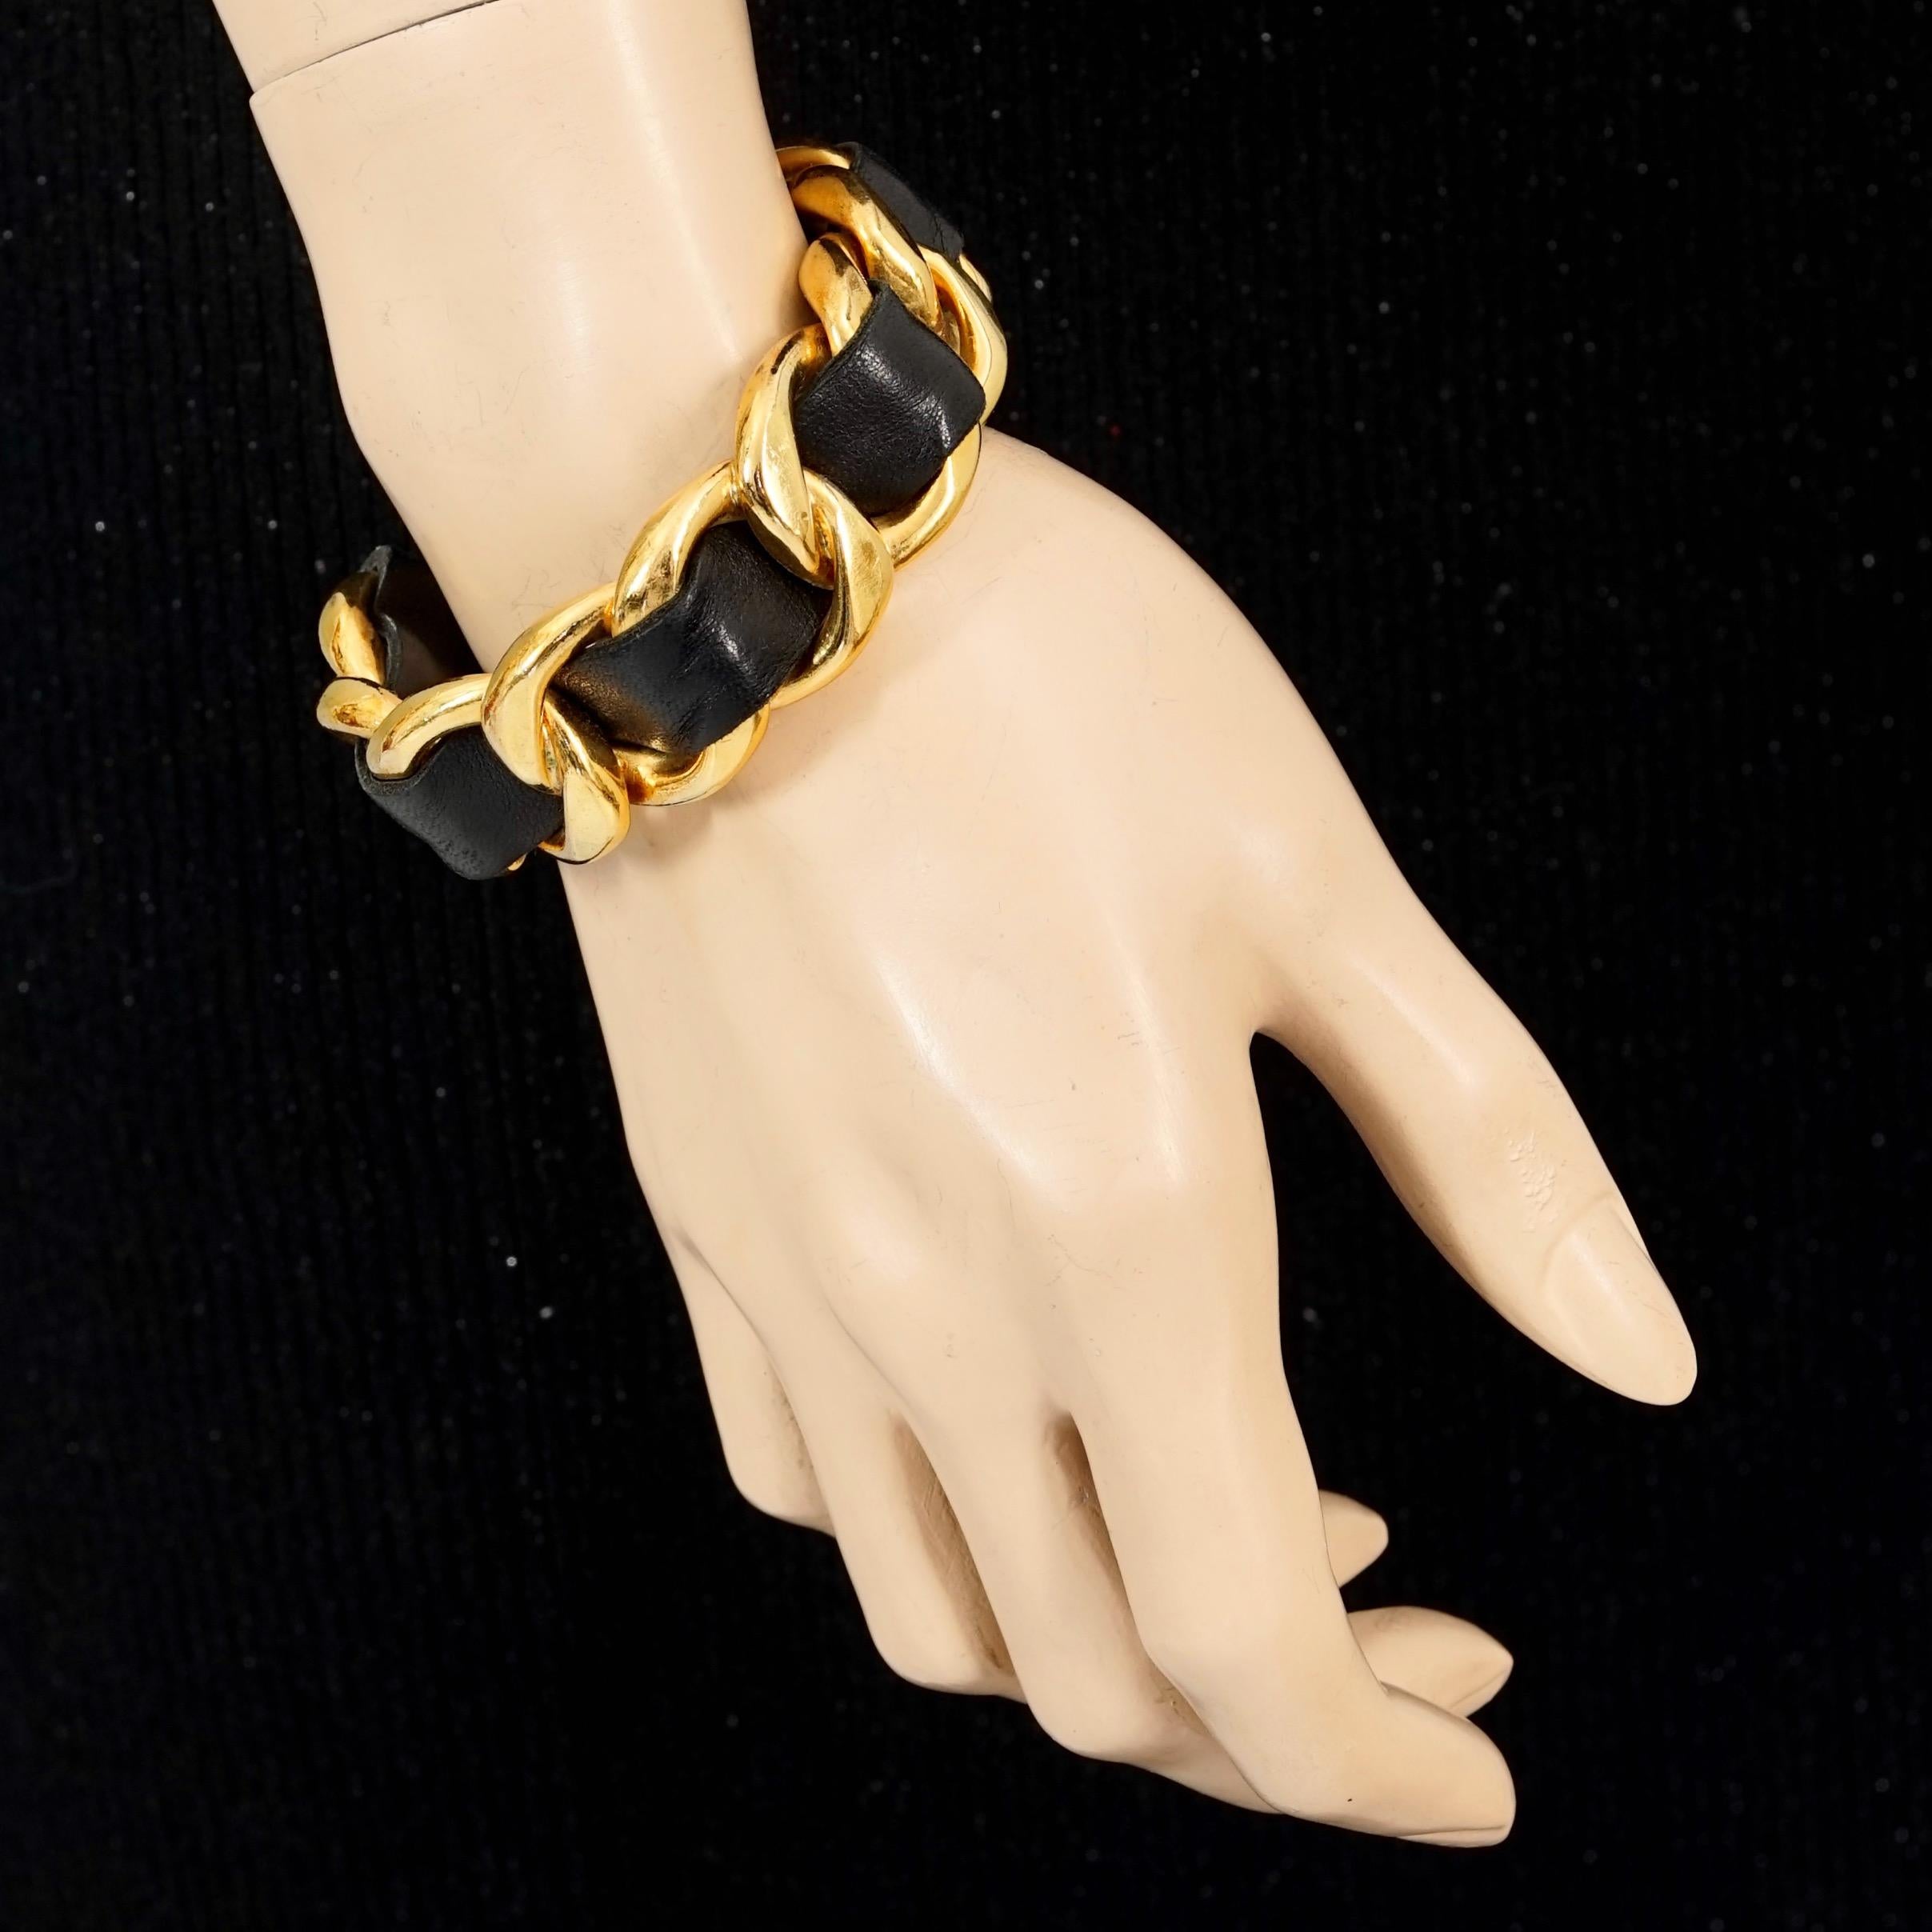 Vintage CHANEL Classic Gold Chain and Leather Bangle Bracelet

Measurements:
Height: 0.90 inch (2.3 cm)
Inside Circumference: 6.81 inches (17.3 cm) opening included

Features:
- 100% Authentic CHANEL.
- Rigid and chunky chain and black leather